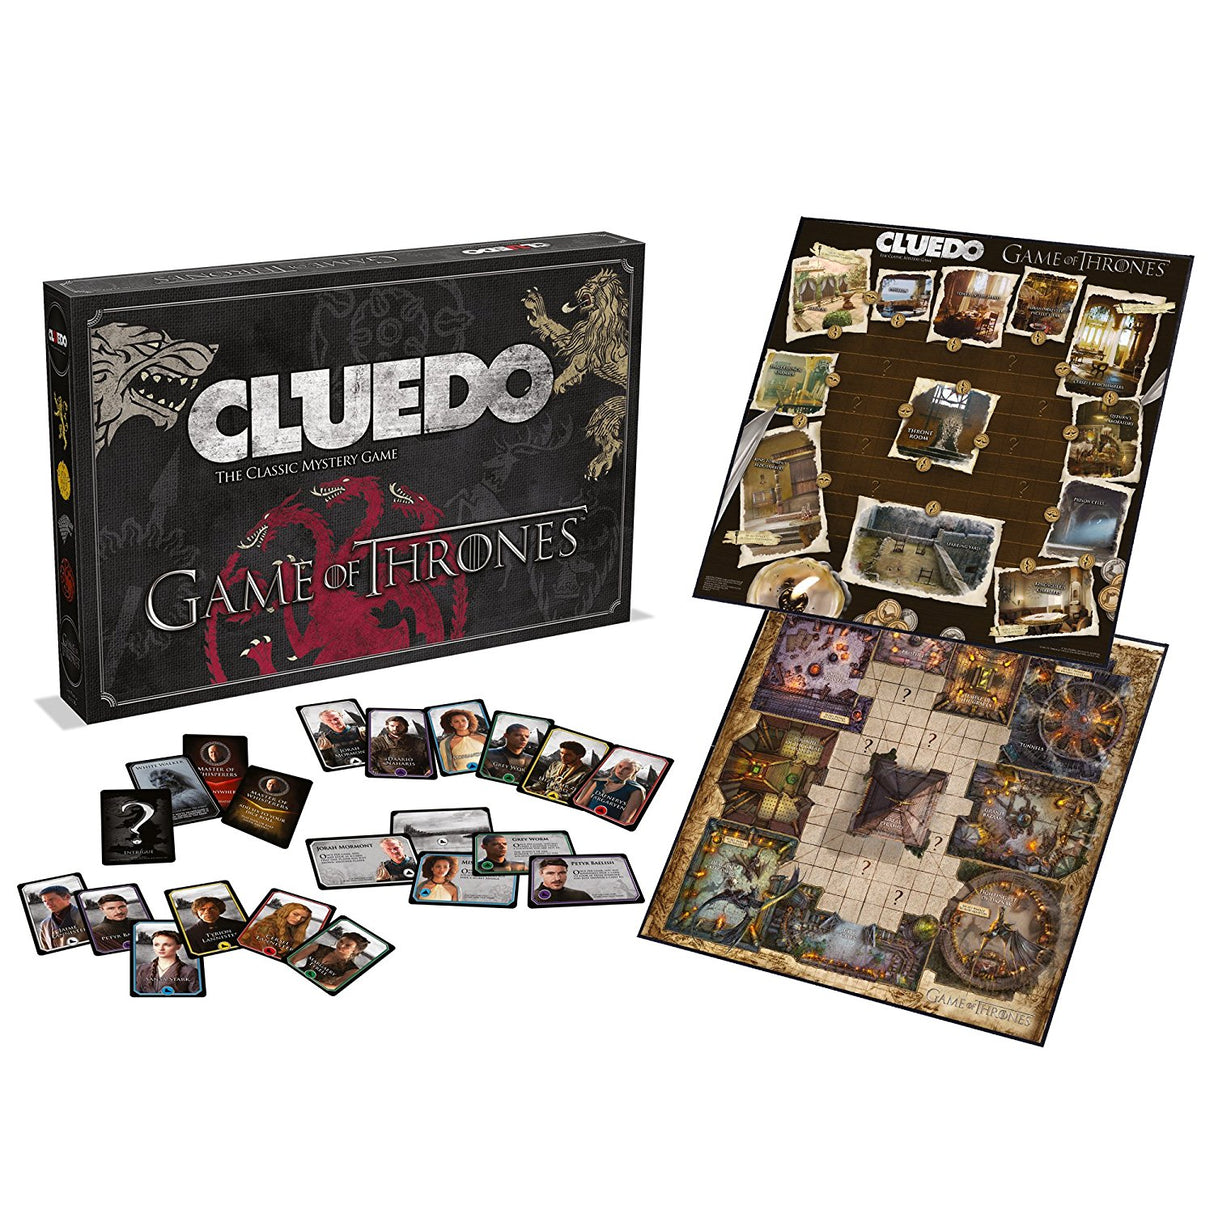 Cluedo Game of Thrones The Classic Mystery Game